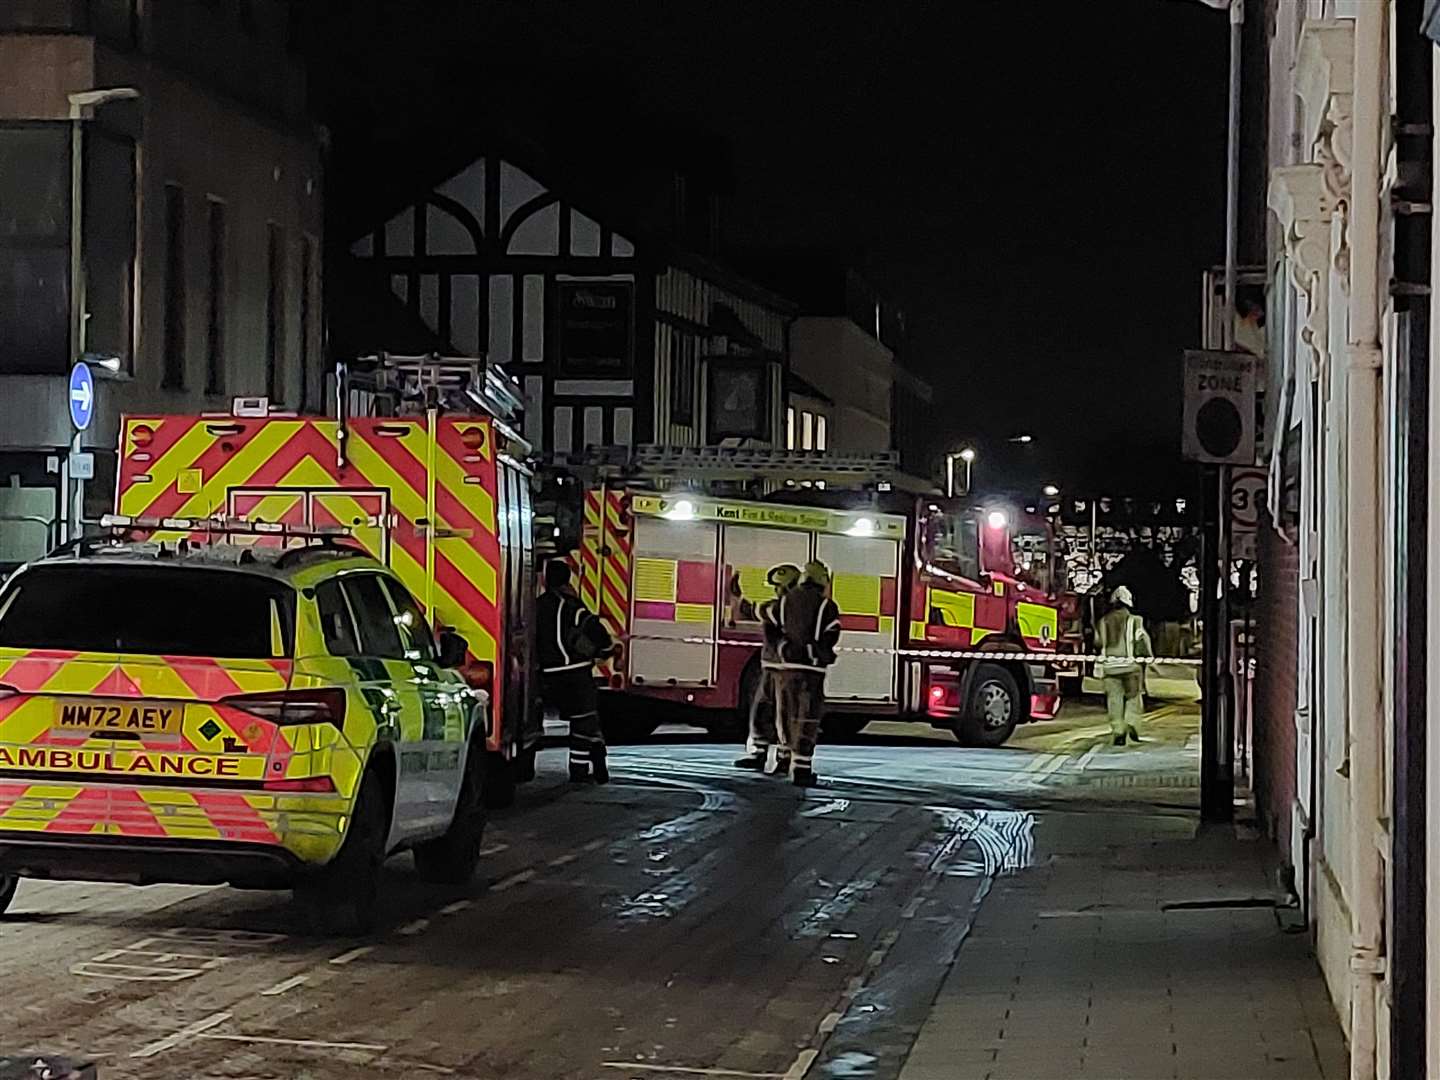 Police, fire engines and ambulances have been spotted in Ashford town centre